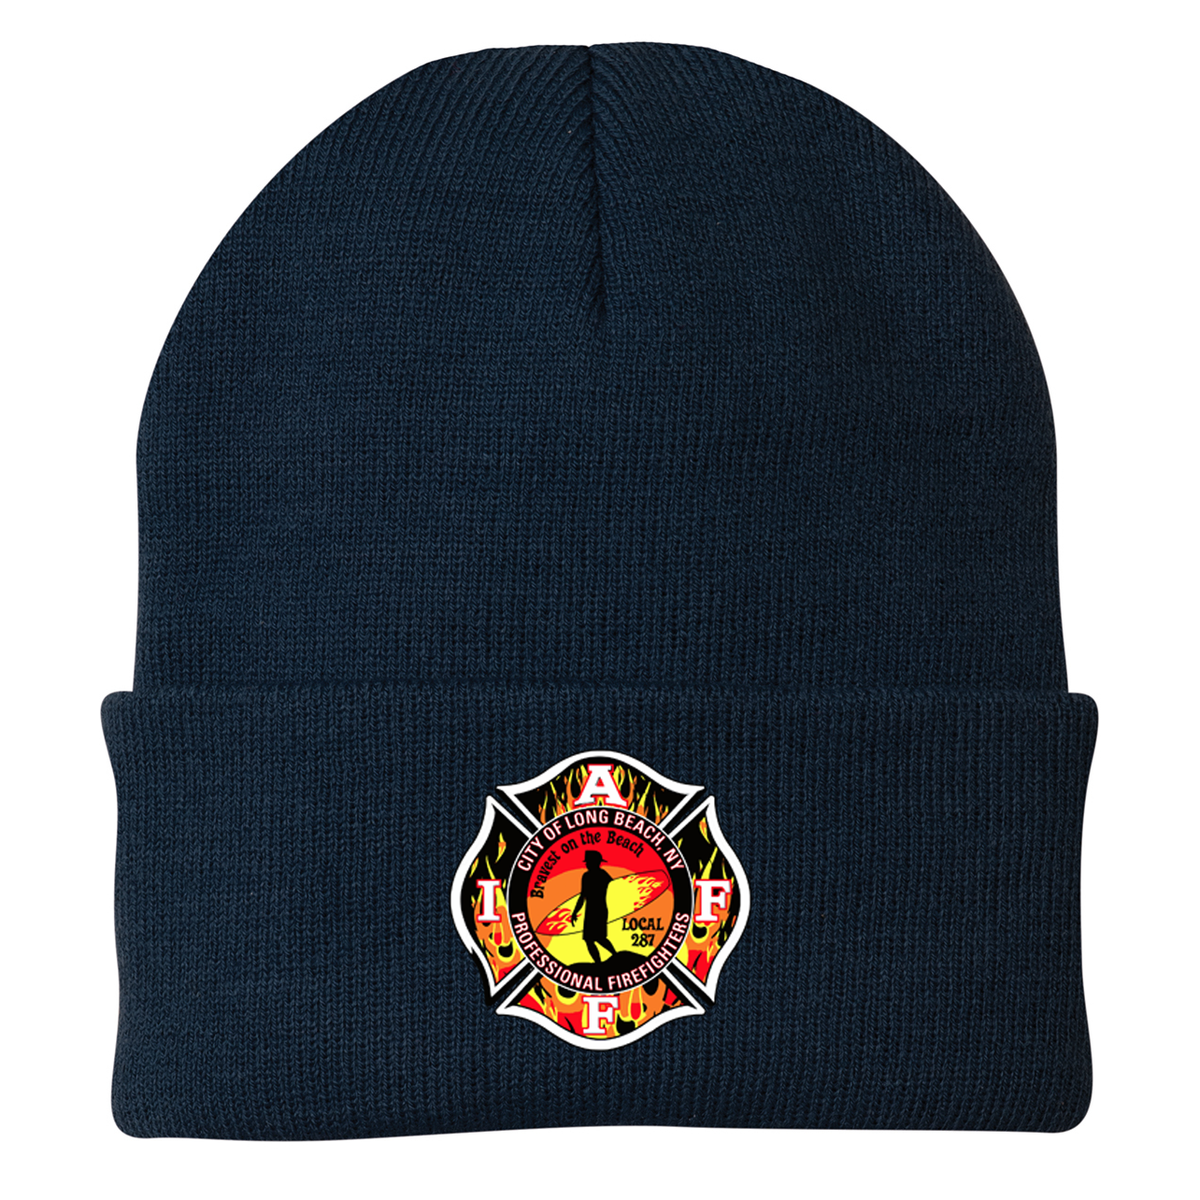 Long Beach Professional Firefighters Knit Beanie